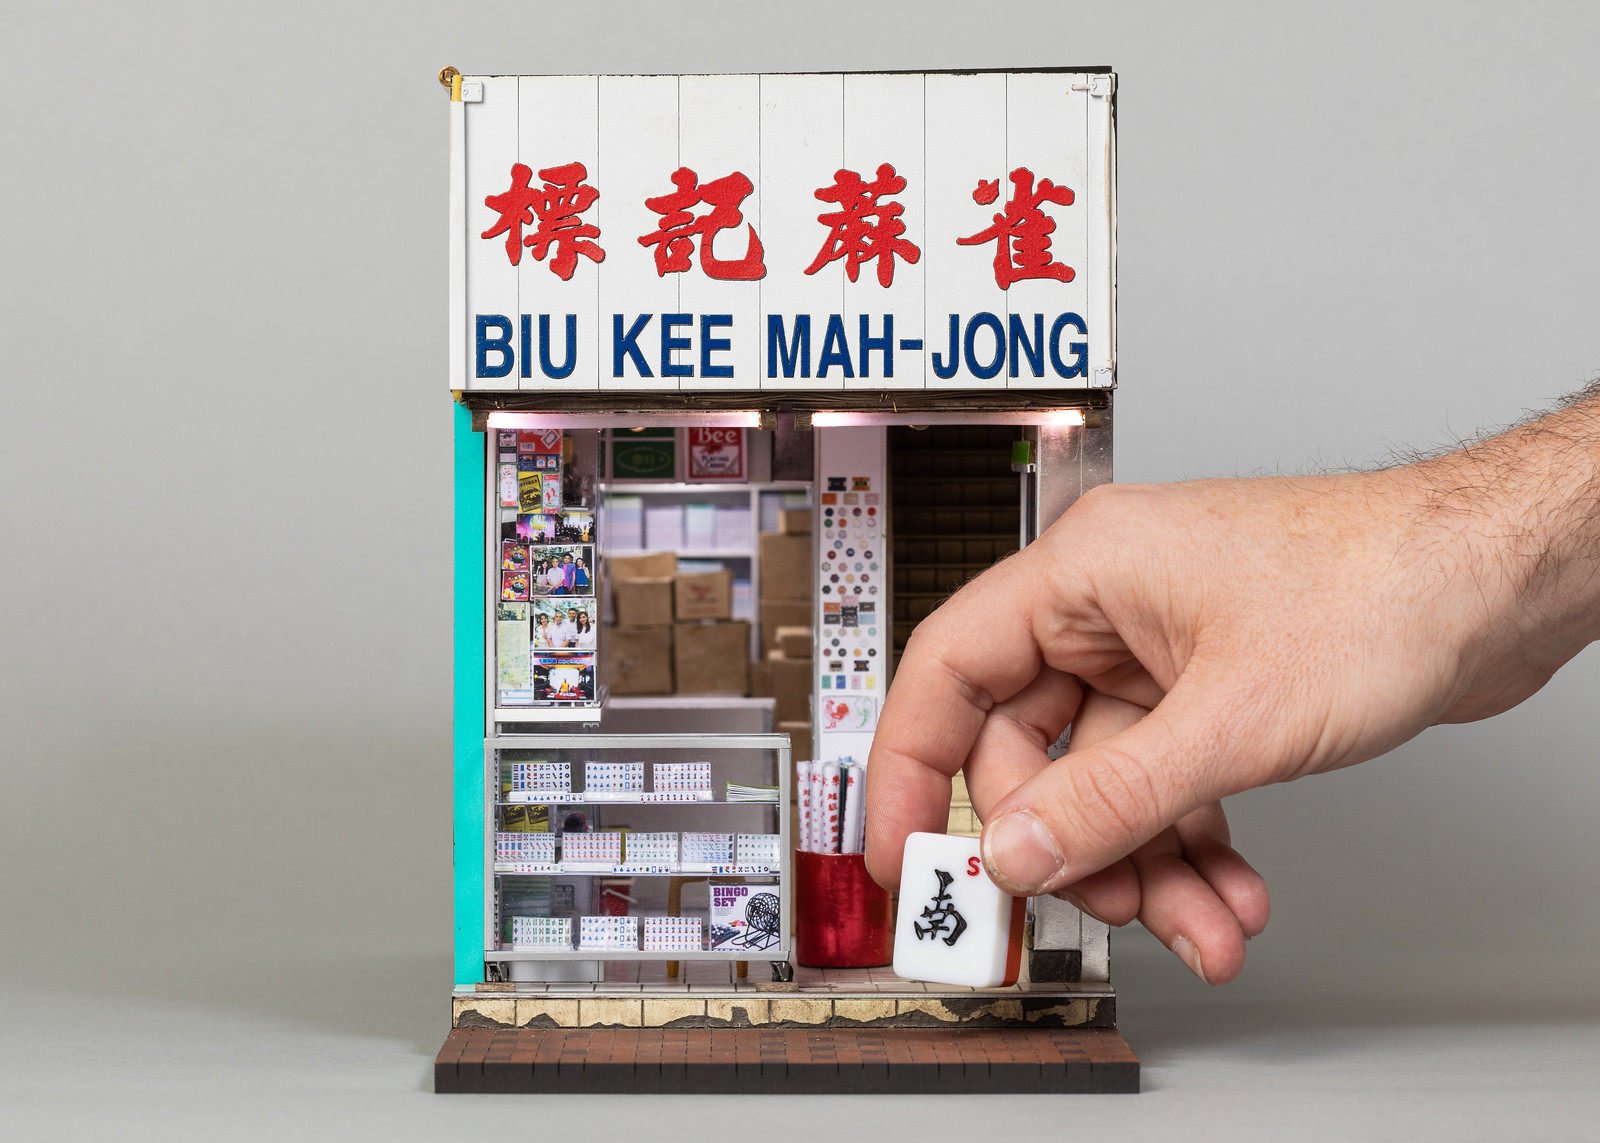 Joshua Smith’s model of Biu Kee Mahjong in Hong Kong, made without seeing the shop in person. Photo: Andrew Beveridge